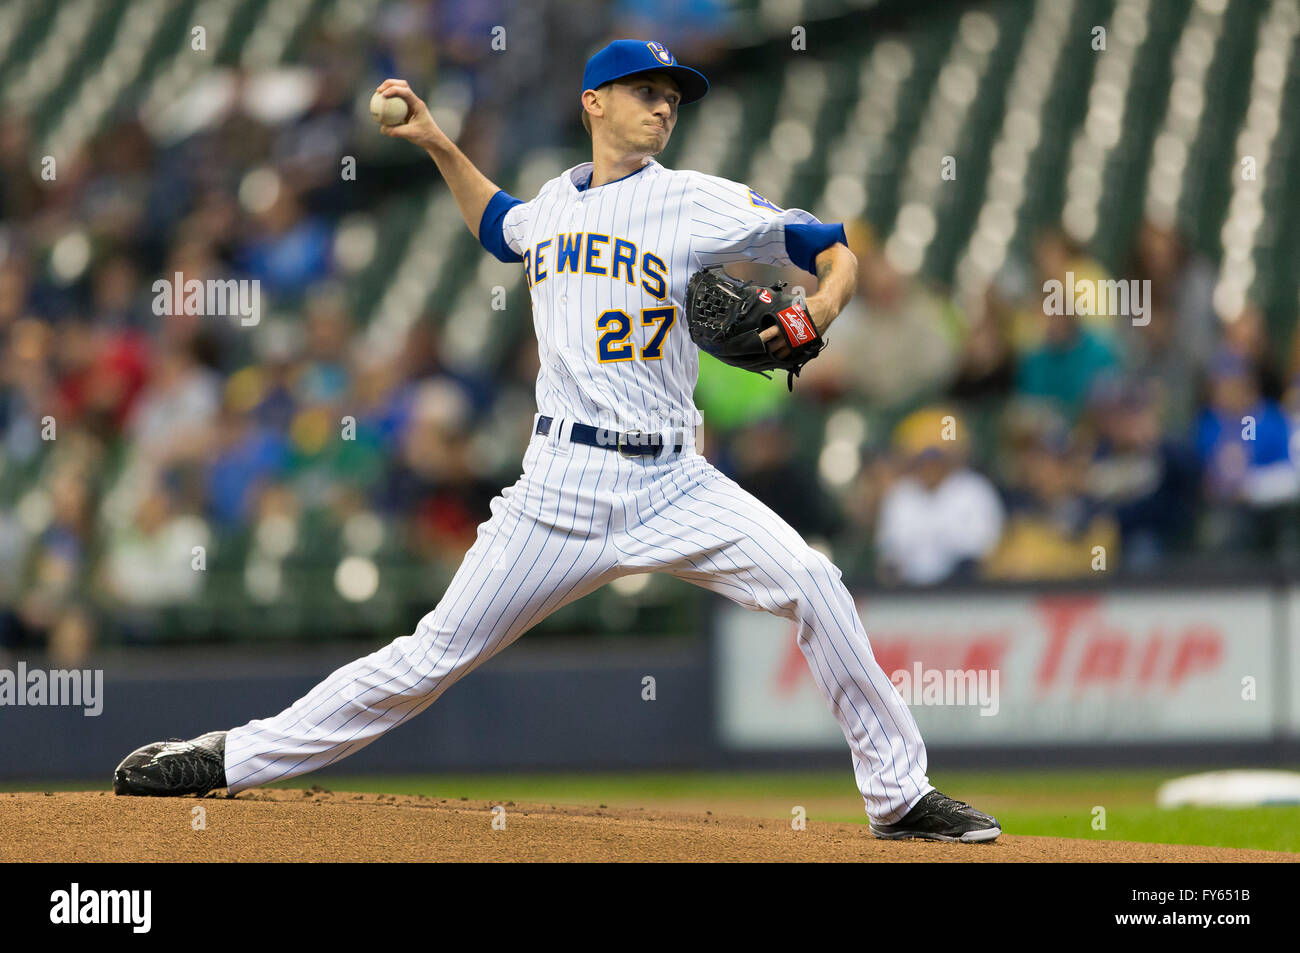 Milwaukee, WI, USA. 22nd Apr, 2016. Milwaukee Brewers starting pitcher Zach Davies #27 delivers a pitch in the first inning of the Major League Baseball game between the Milwaukee Brewers and the Philadelphia Phillies at Miller Park in Milwaukee, WI. John Fisher/CSM/Alamy Live News Stock Photo